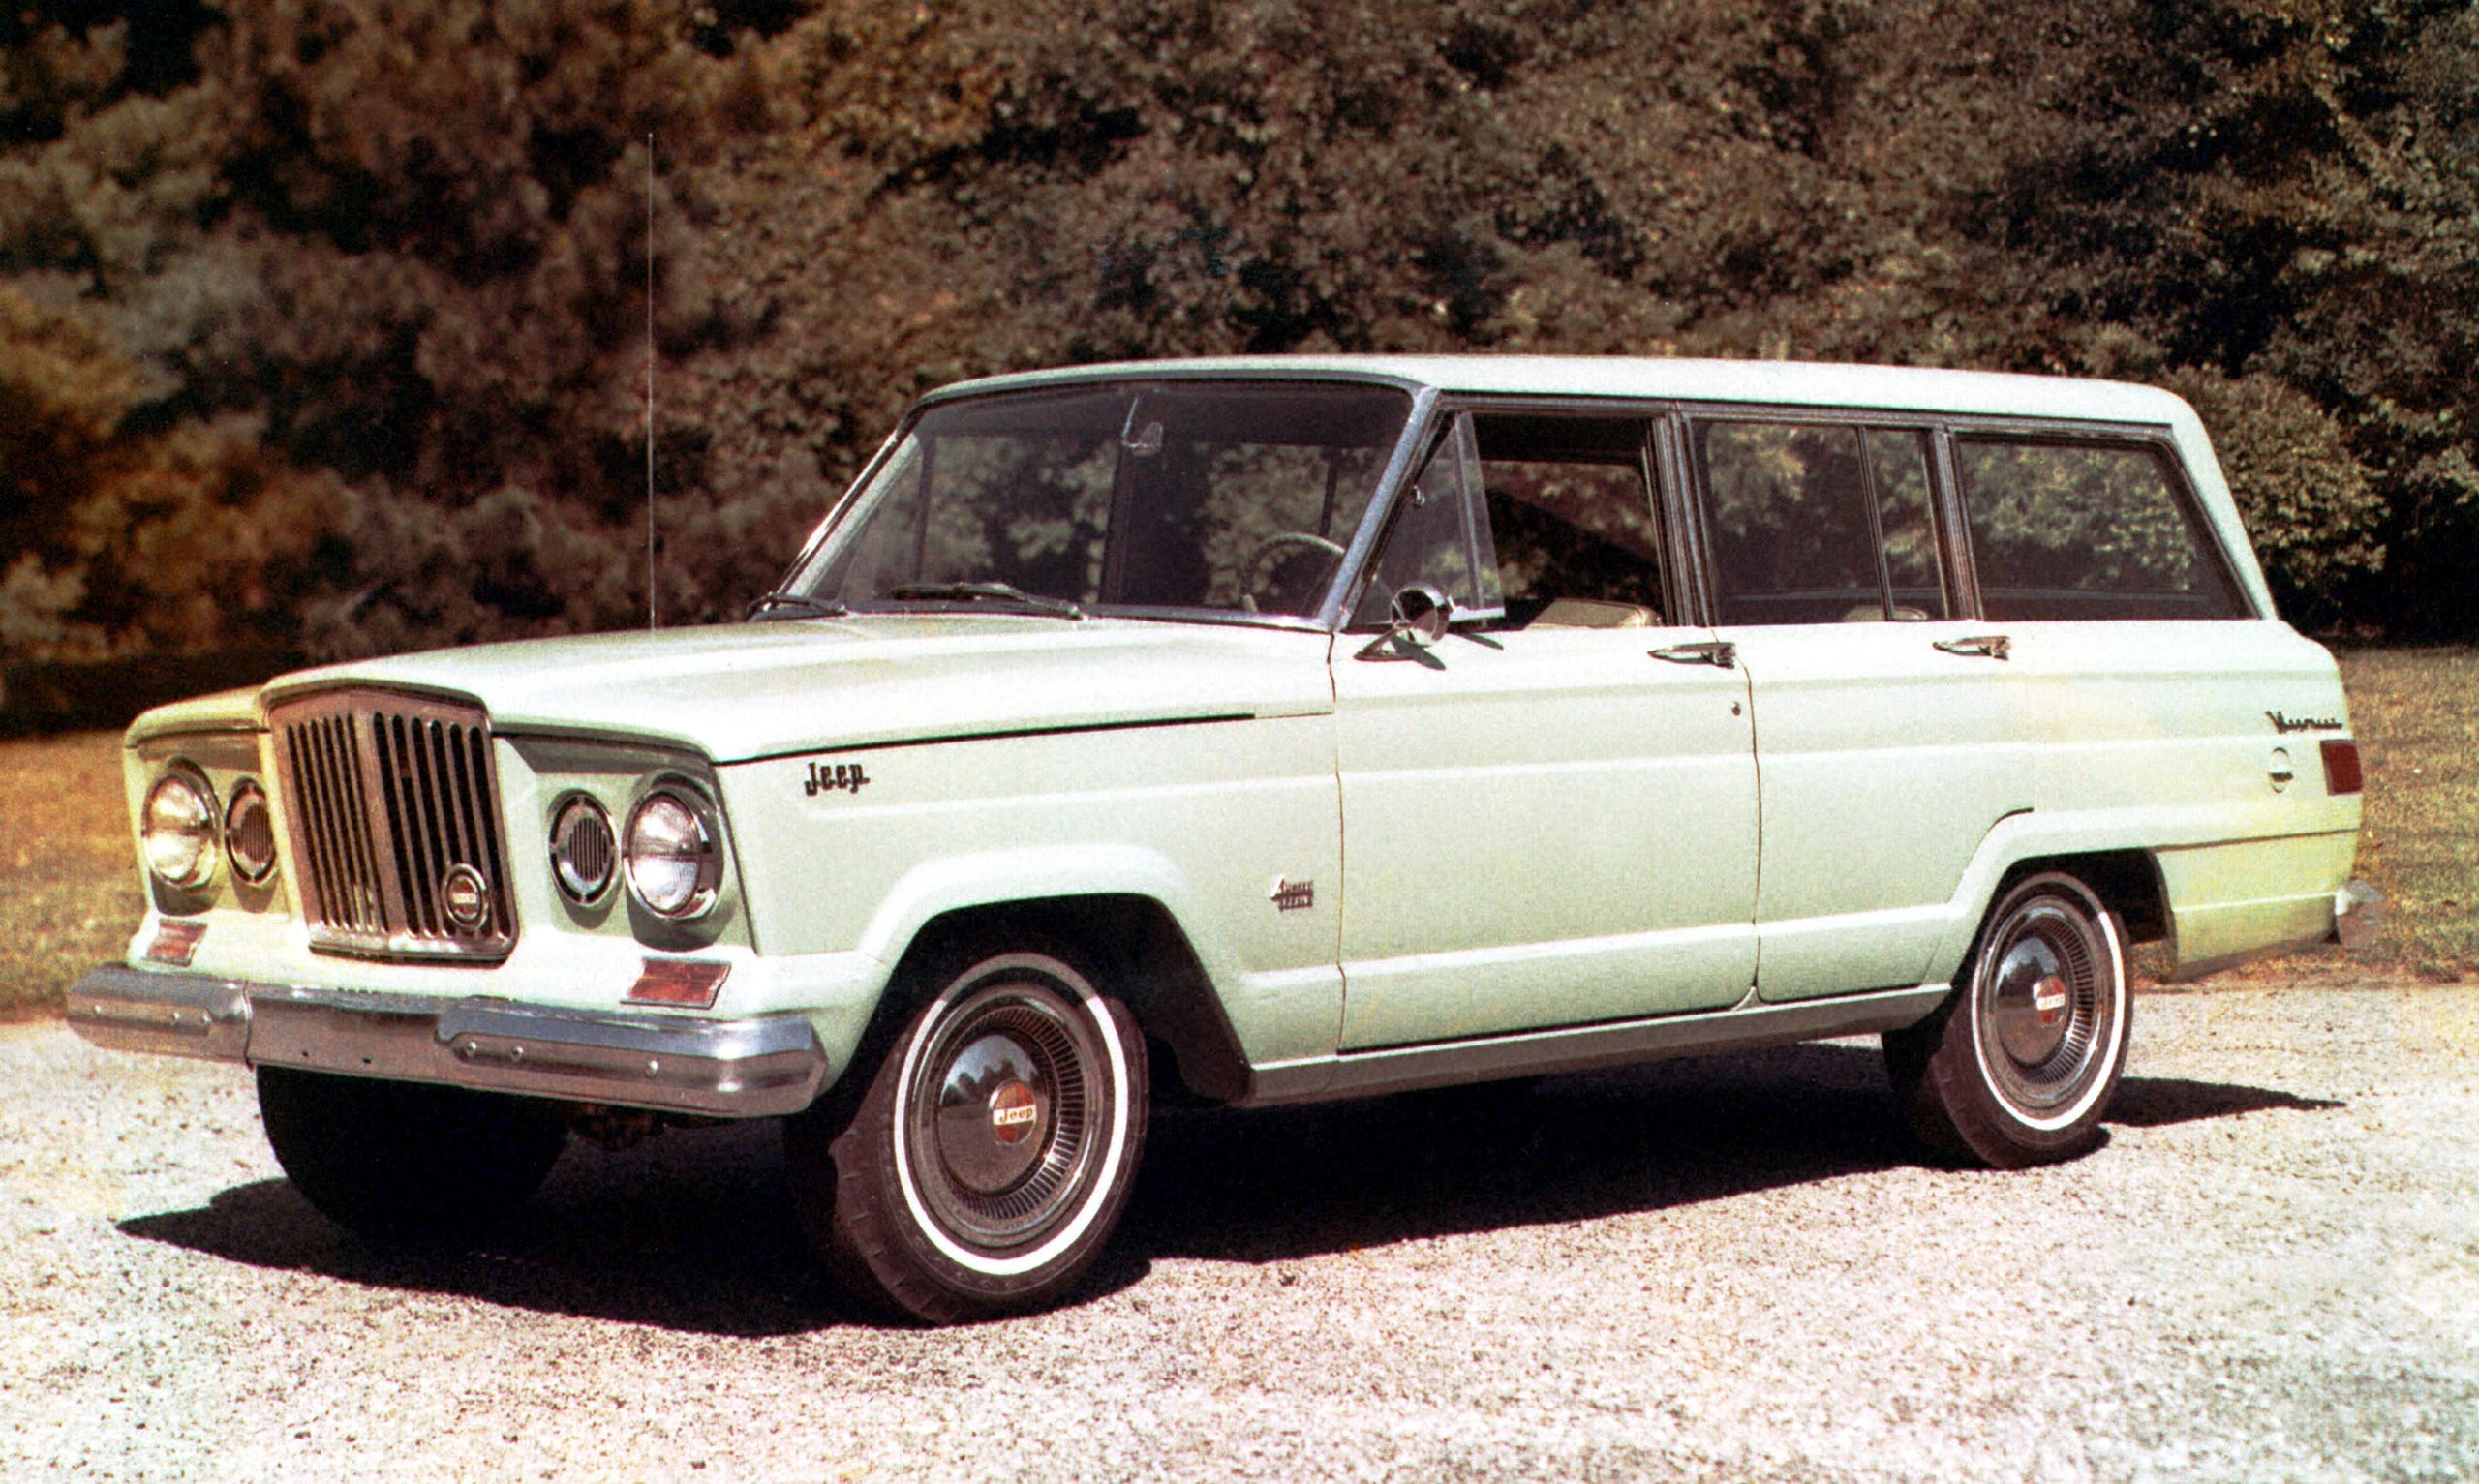 After a decade-and-a-half of production, the Jeep Station Wagon would be succeeded by the longer, lower and larger Jeep Wagoneer. The 1963 model is shown here. The Wagoneer was the first four-wheel-drive vehicle offered with an optional automatic transmission.